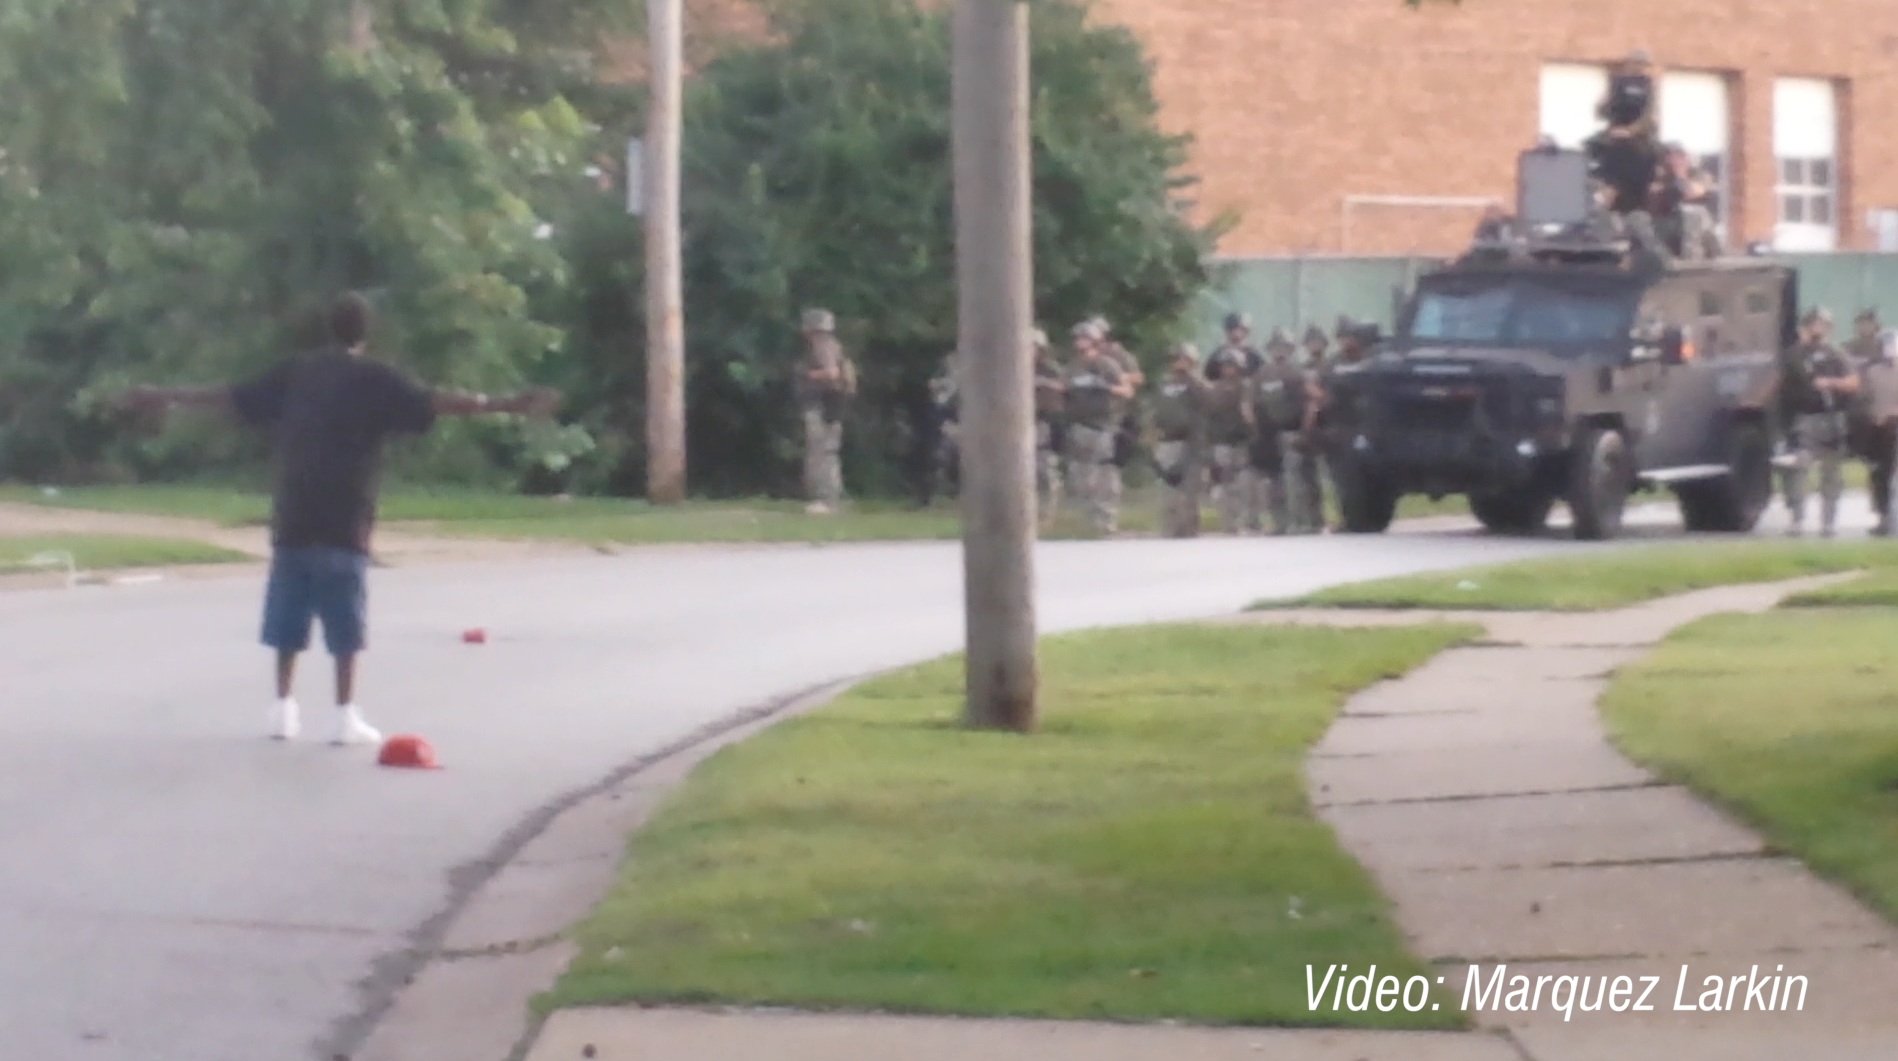 Exclusive Video: This Is How Police Treated Residents of the Apartment Complex Where Michael Brown Was Killed